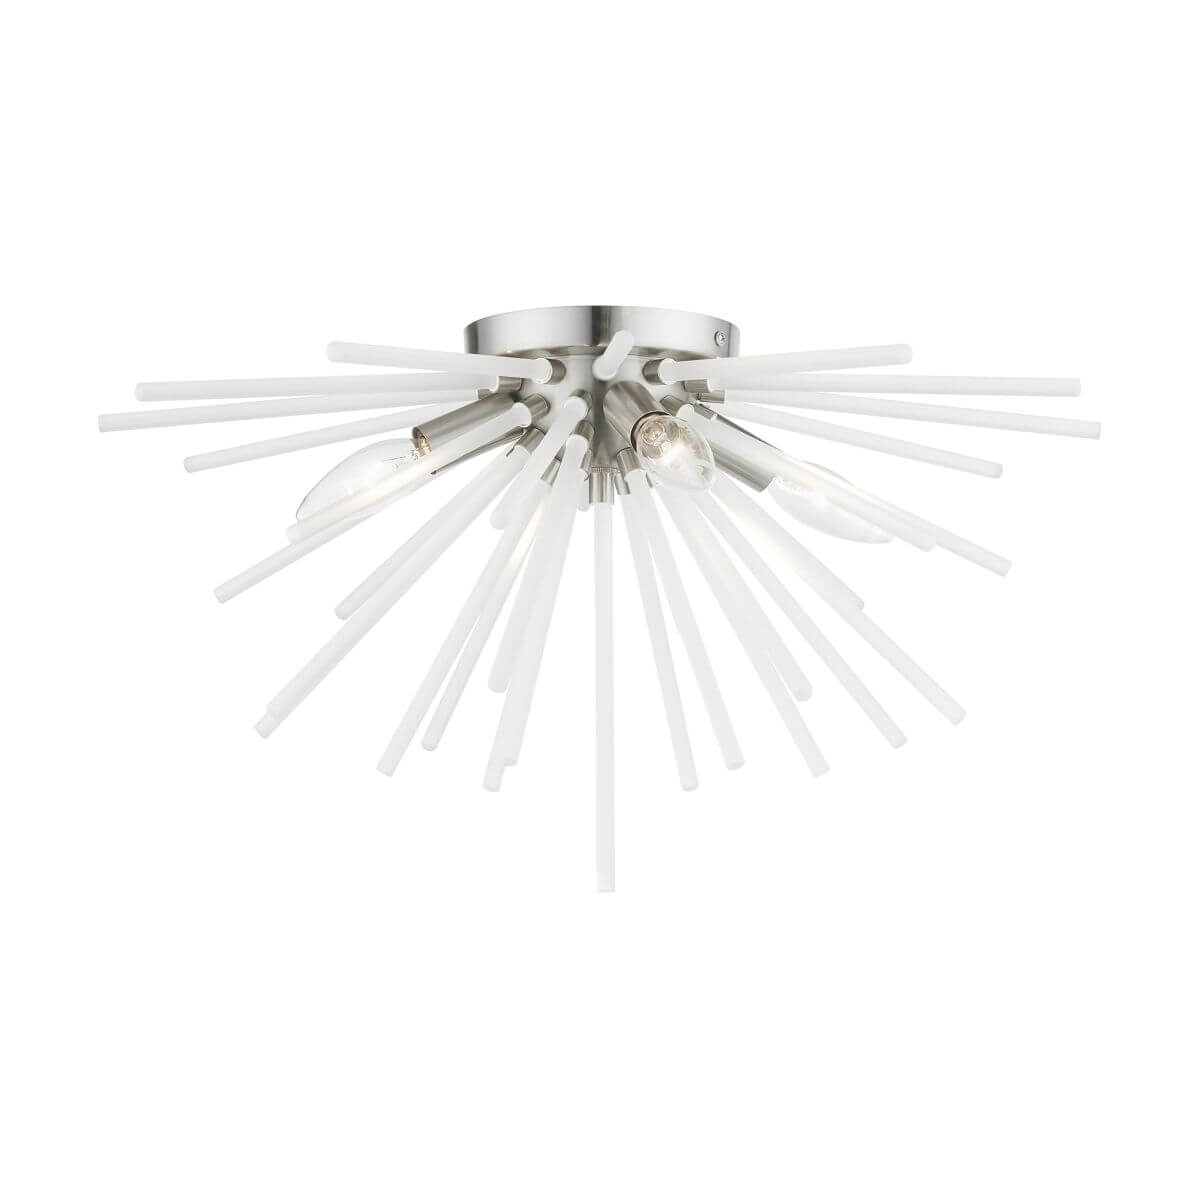 Livex 48820-91 Uptown 4 Light 20 inch Flush Mount in Brushed Nickel with Acid Etched Rods